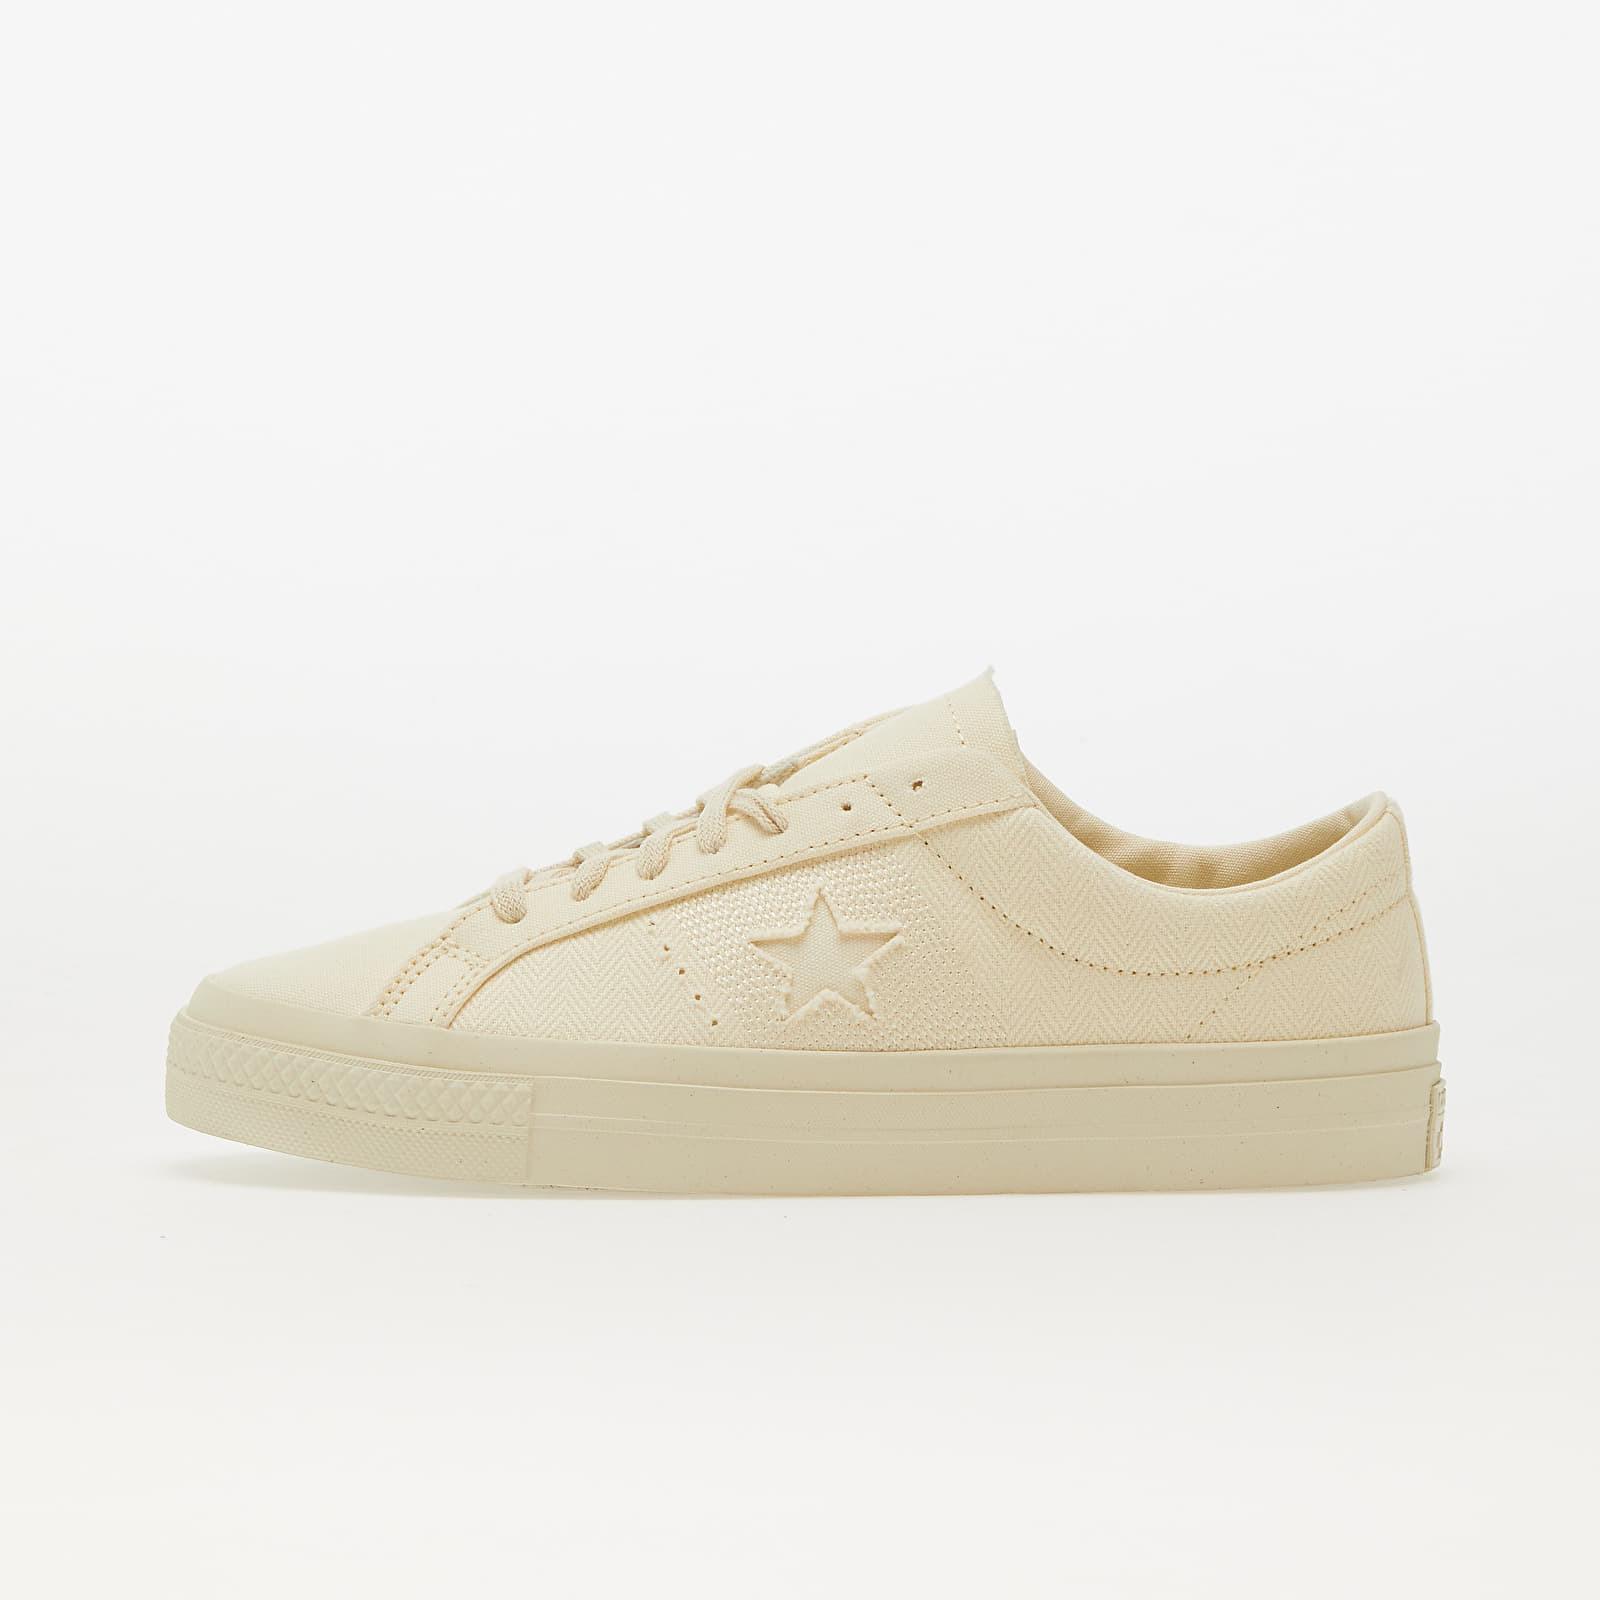 Converse One Star Pro Mom's Potato Salad/ Egret in Natural | Lyst